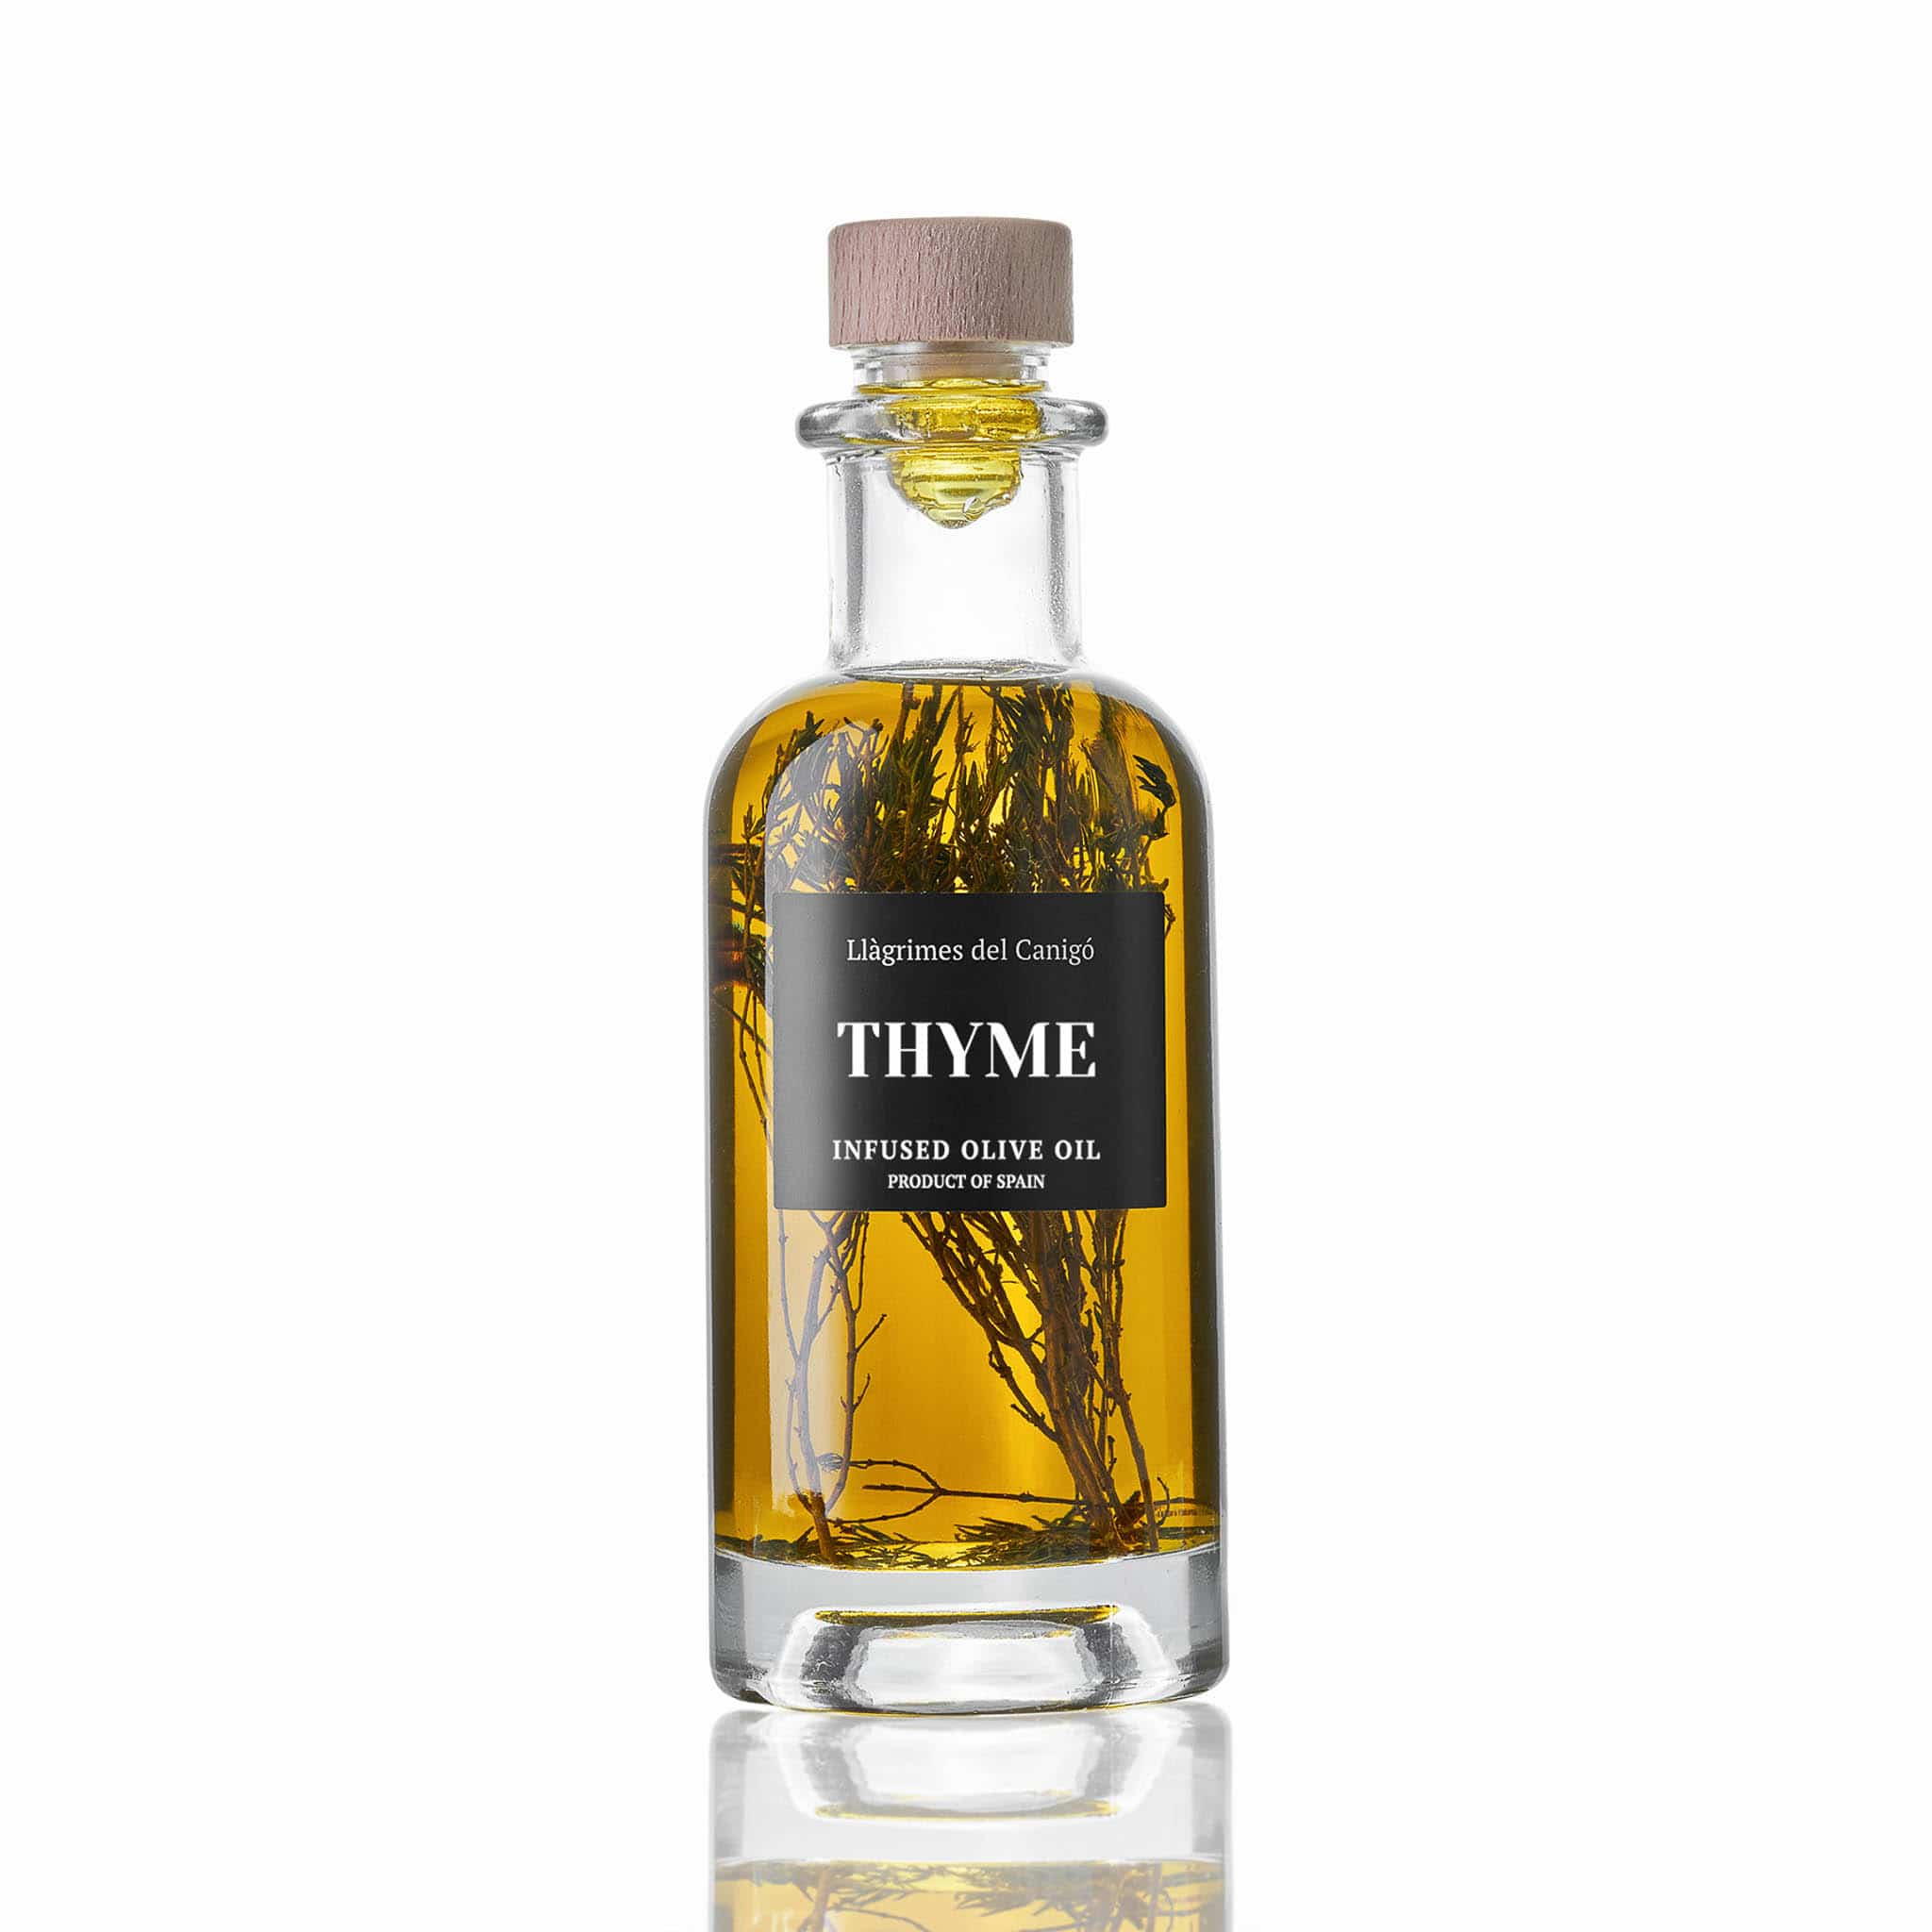 Llagrimes del Canigo Thyme Infused Olive Oil, 250ml